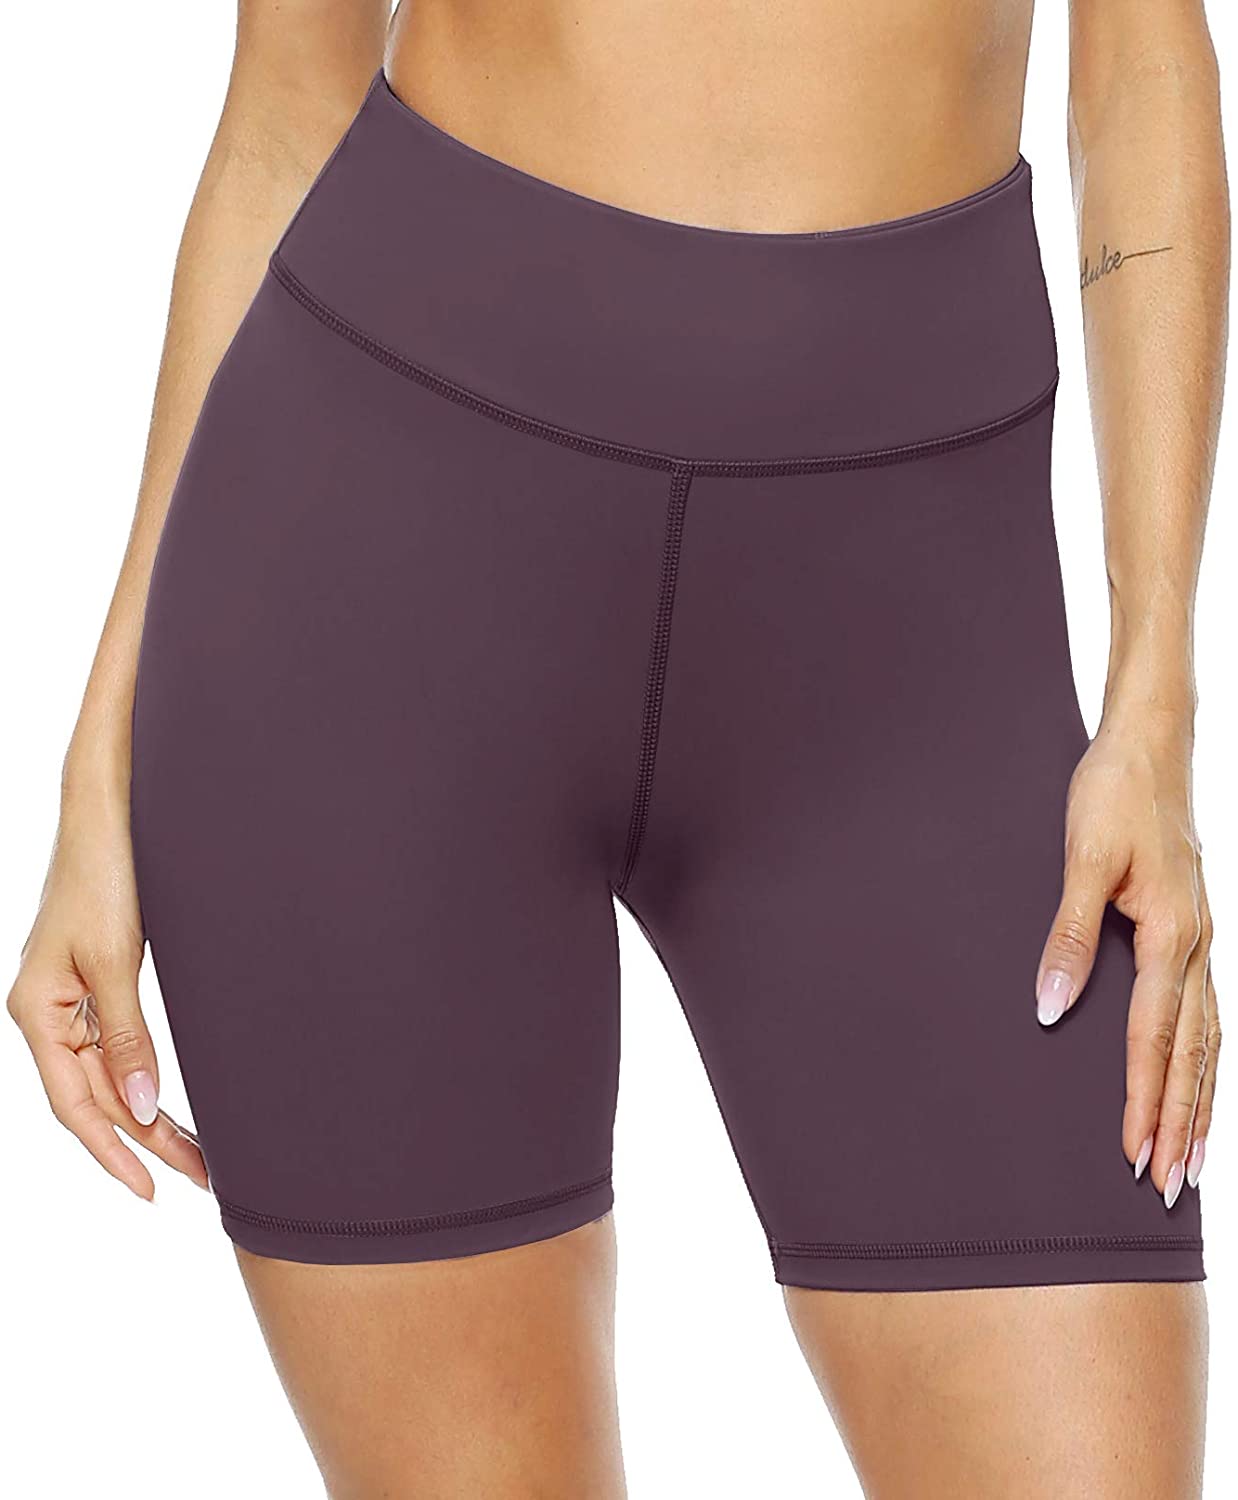 PERSIT Women's High Waist Workout Yoga Shorts with Pockets, Non See-Through  Stretch Tummy Control Athletic Shorts